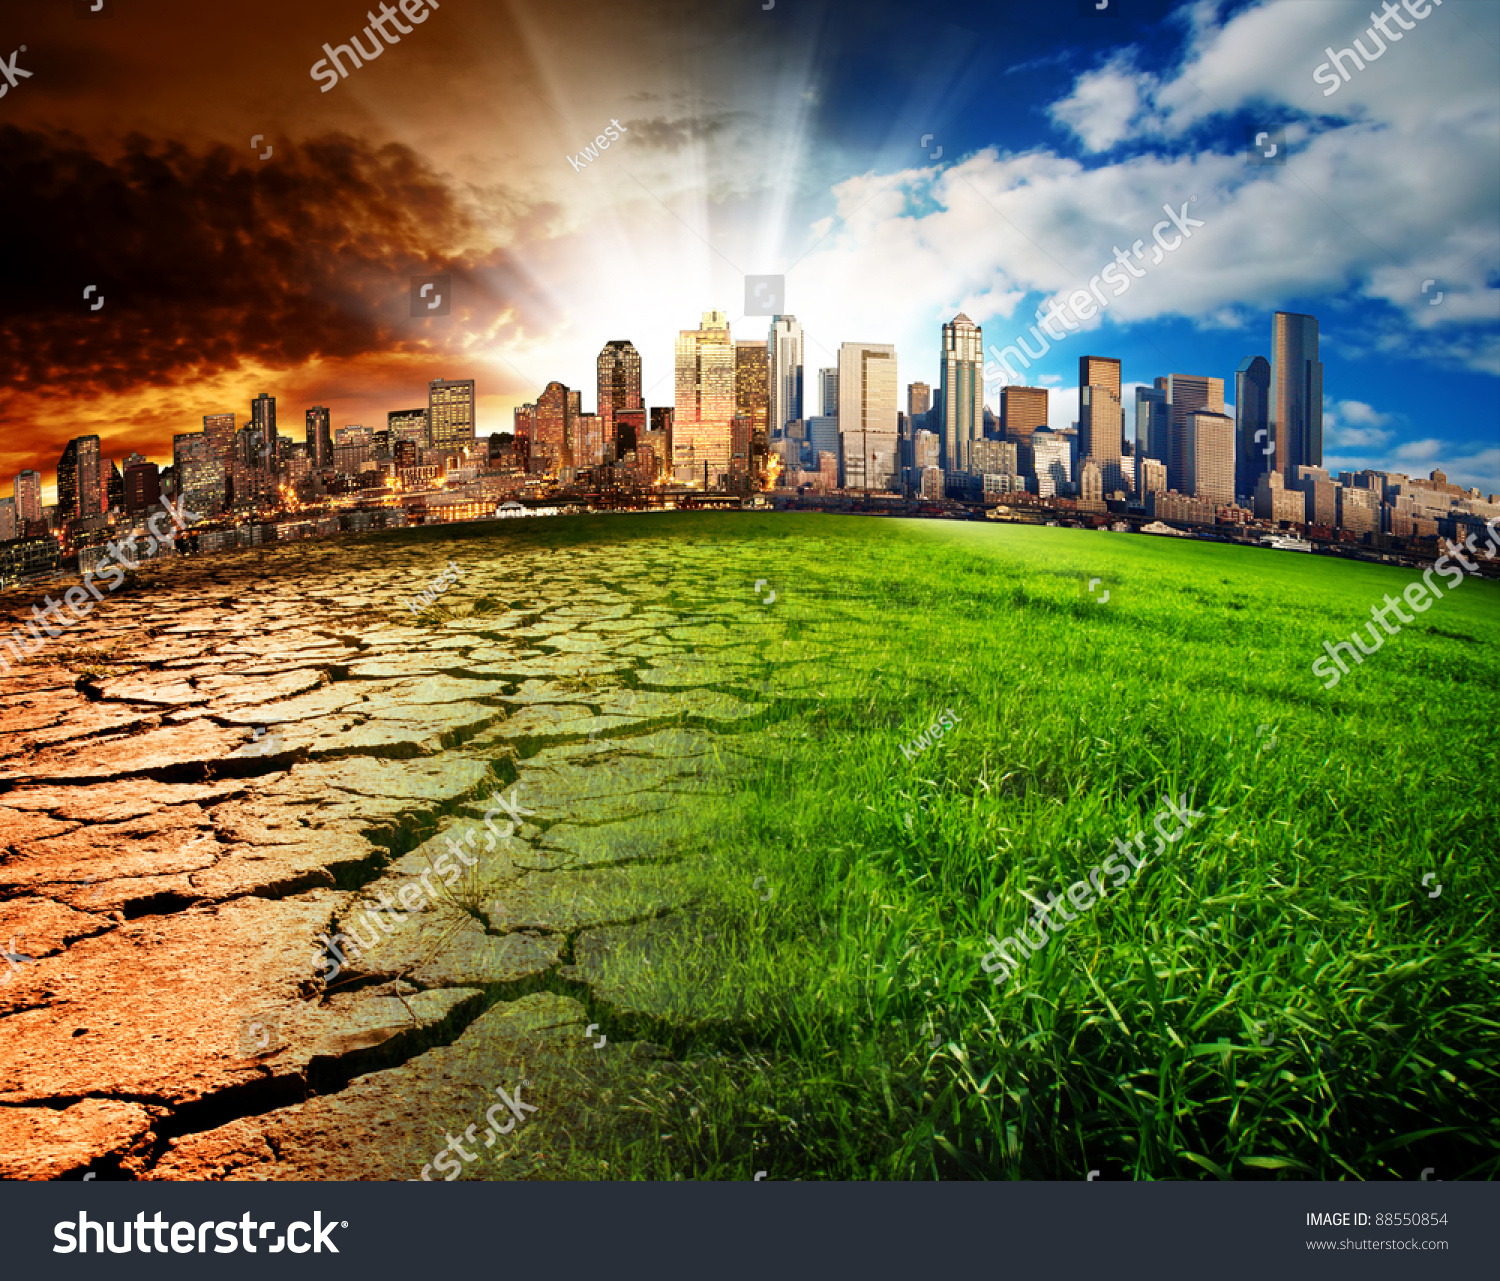 A city showing the effect of Climate Change #88550854